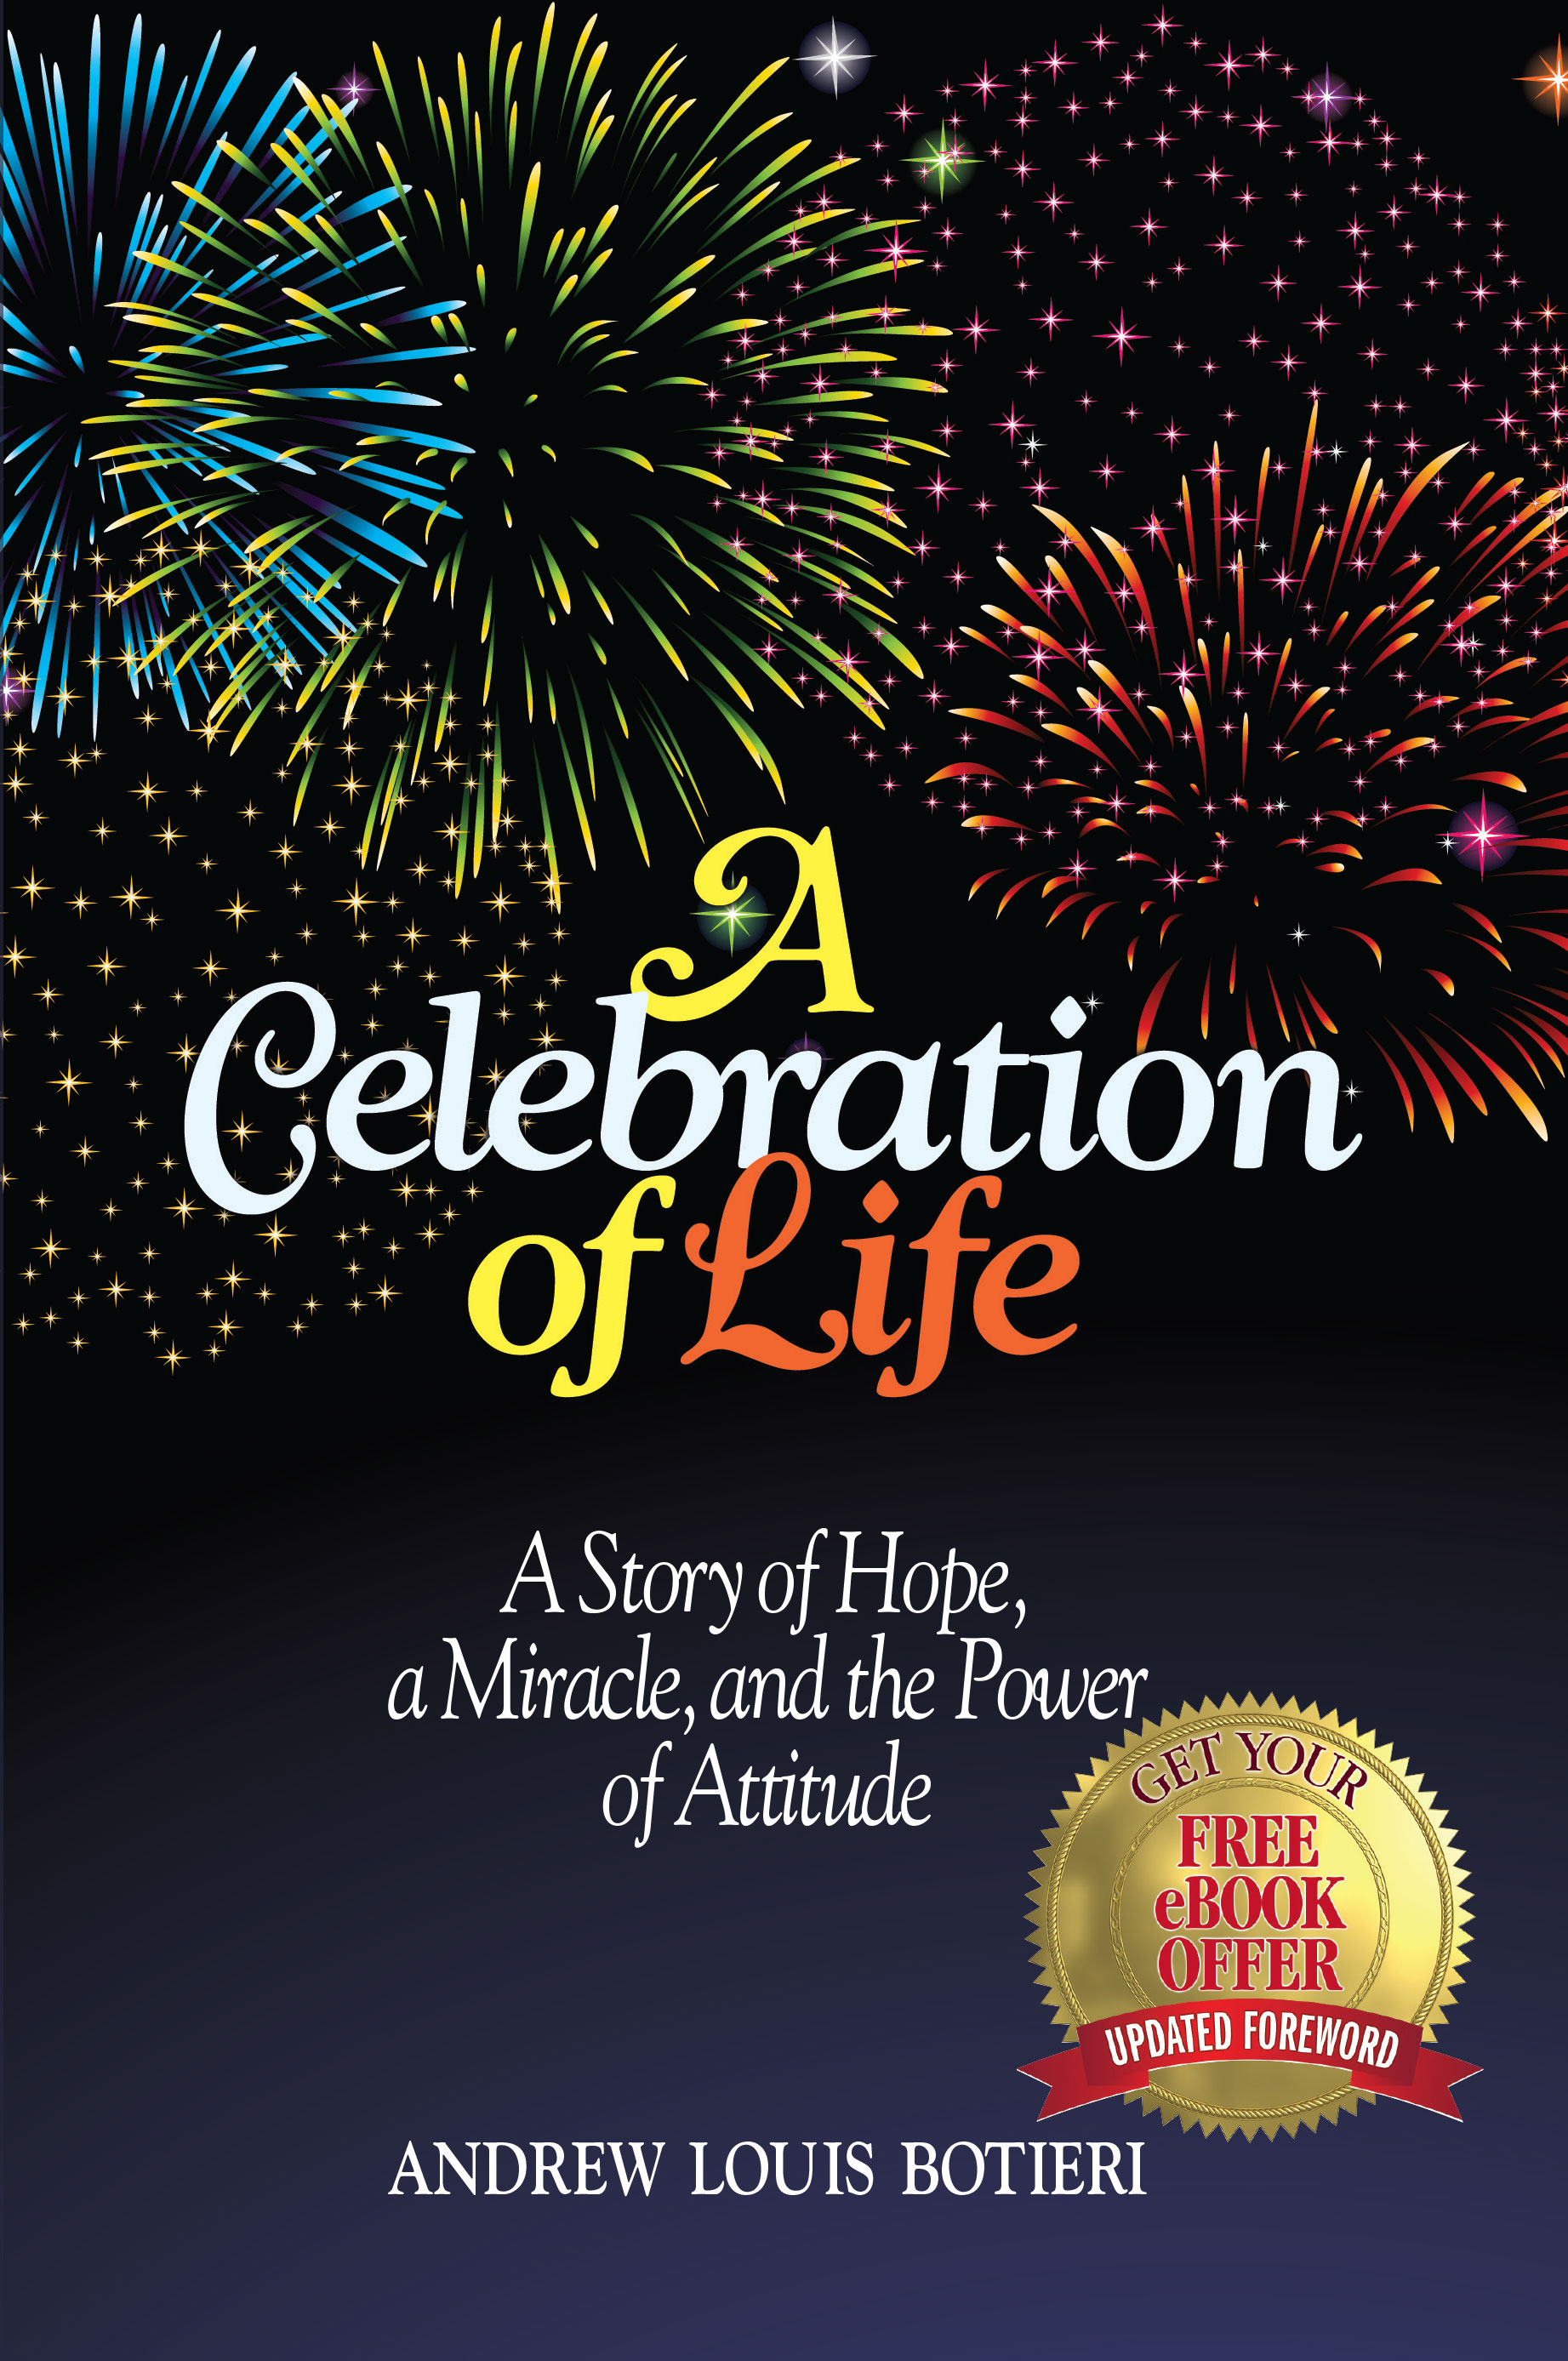 A Celebration of Life: A Story of Hope, a Miracle, and the Power of Attitude by Andrew Louis Botieri, Scleroderma Survivor & Inspirational Speaker